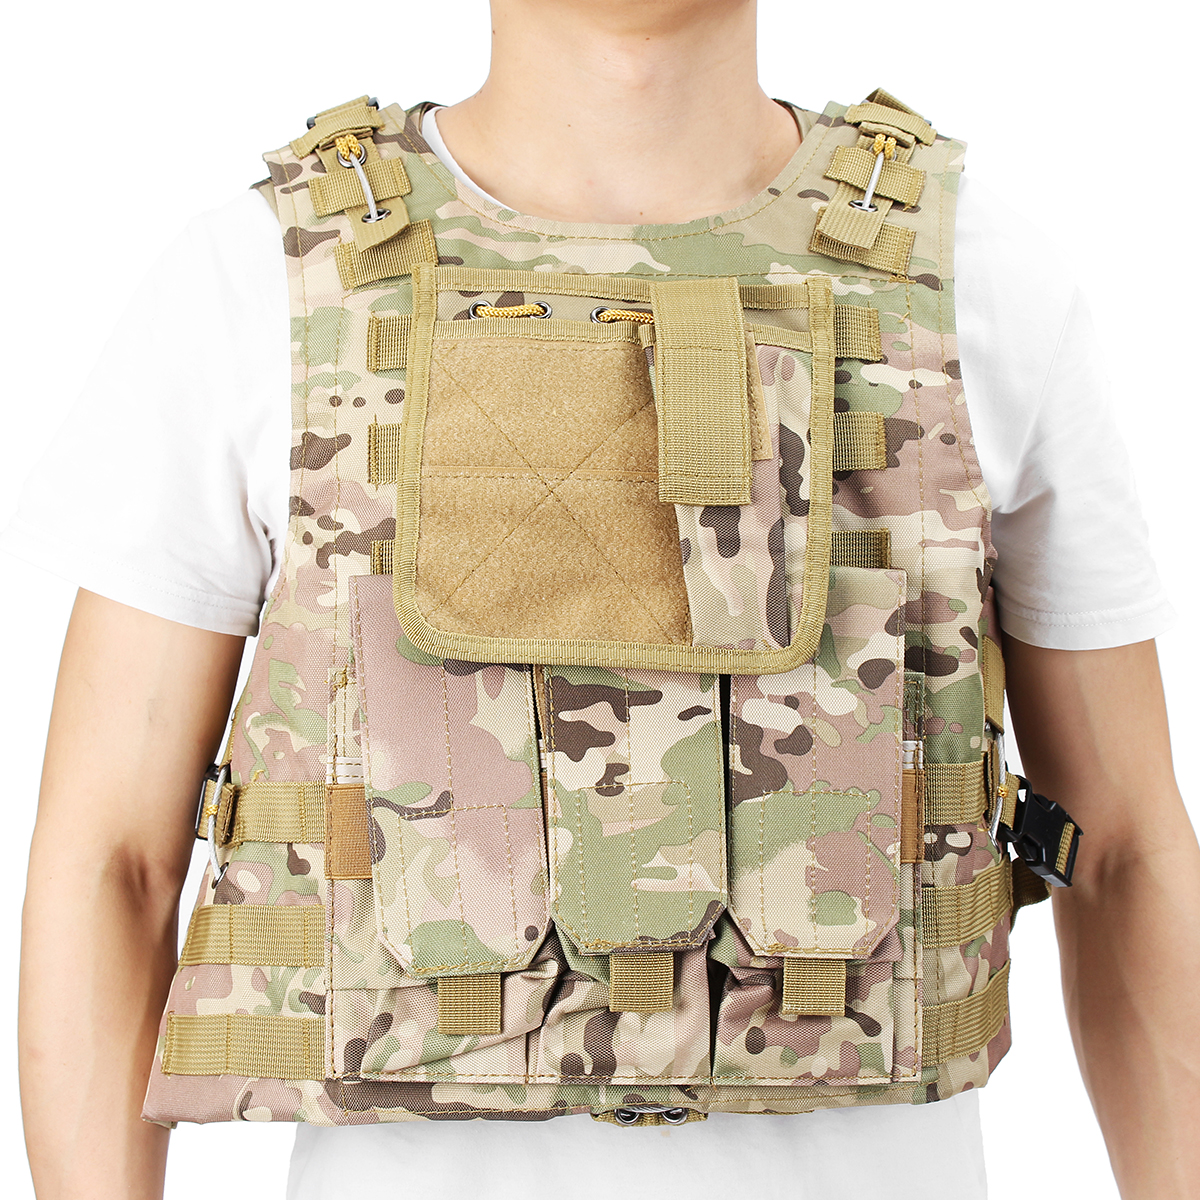 Military-Tactical-Vest-Molle-Combat-Assault-Plate-Carrier-Tactical-Vest-CS-Outdoor-Clothing-Hunting--1817235-6